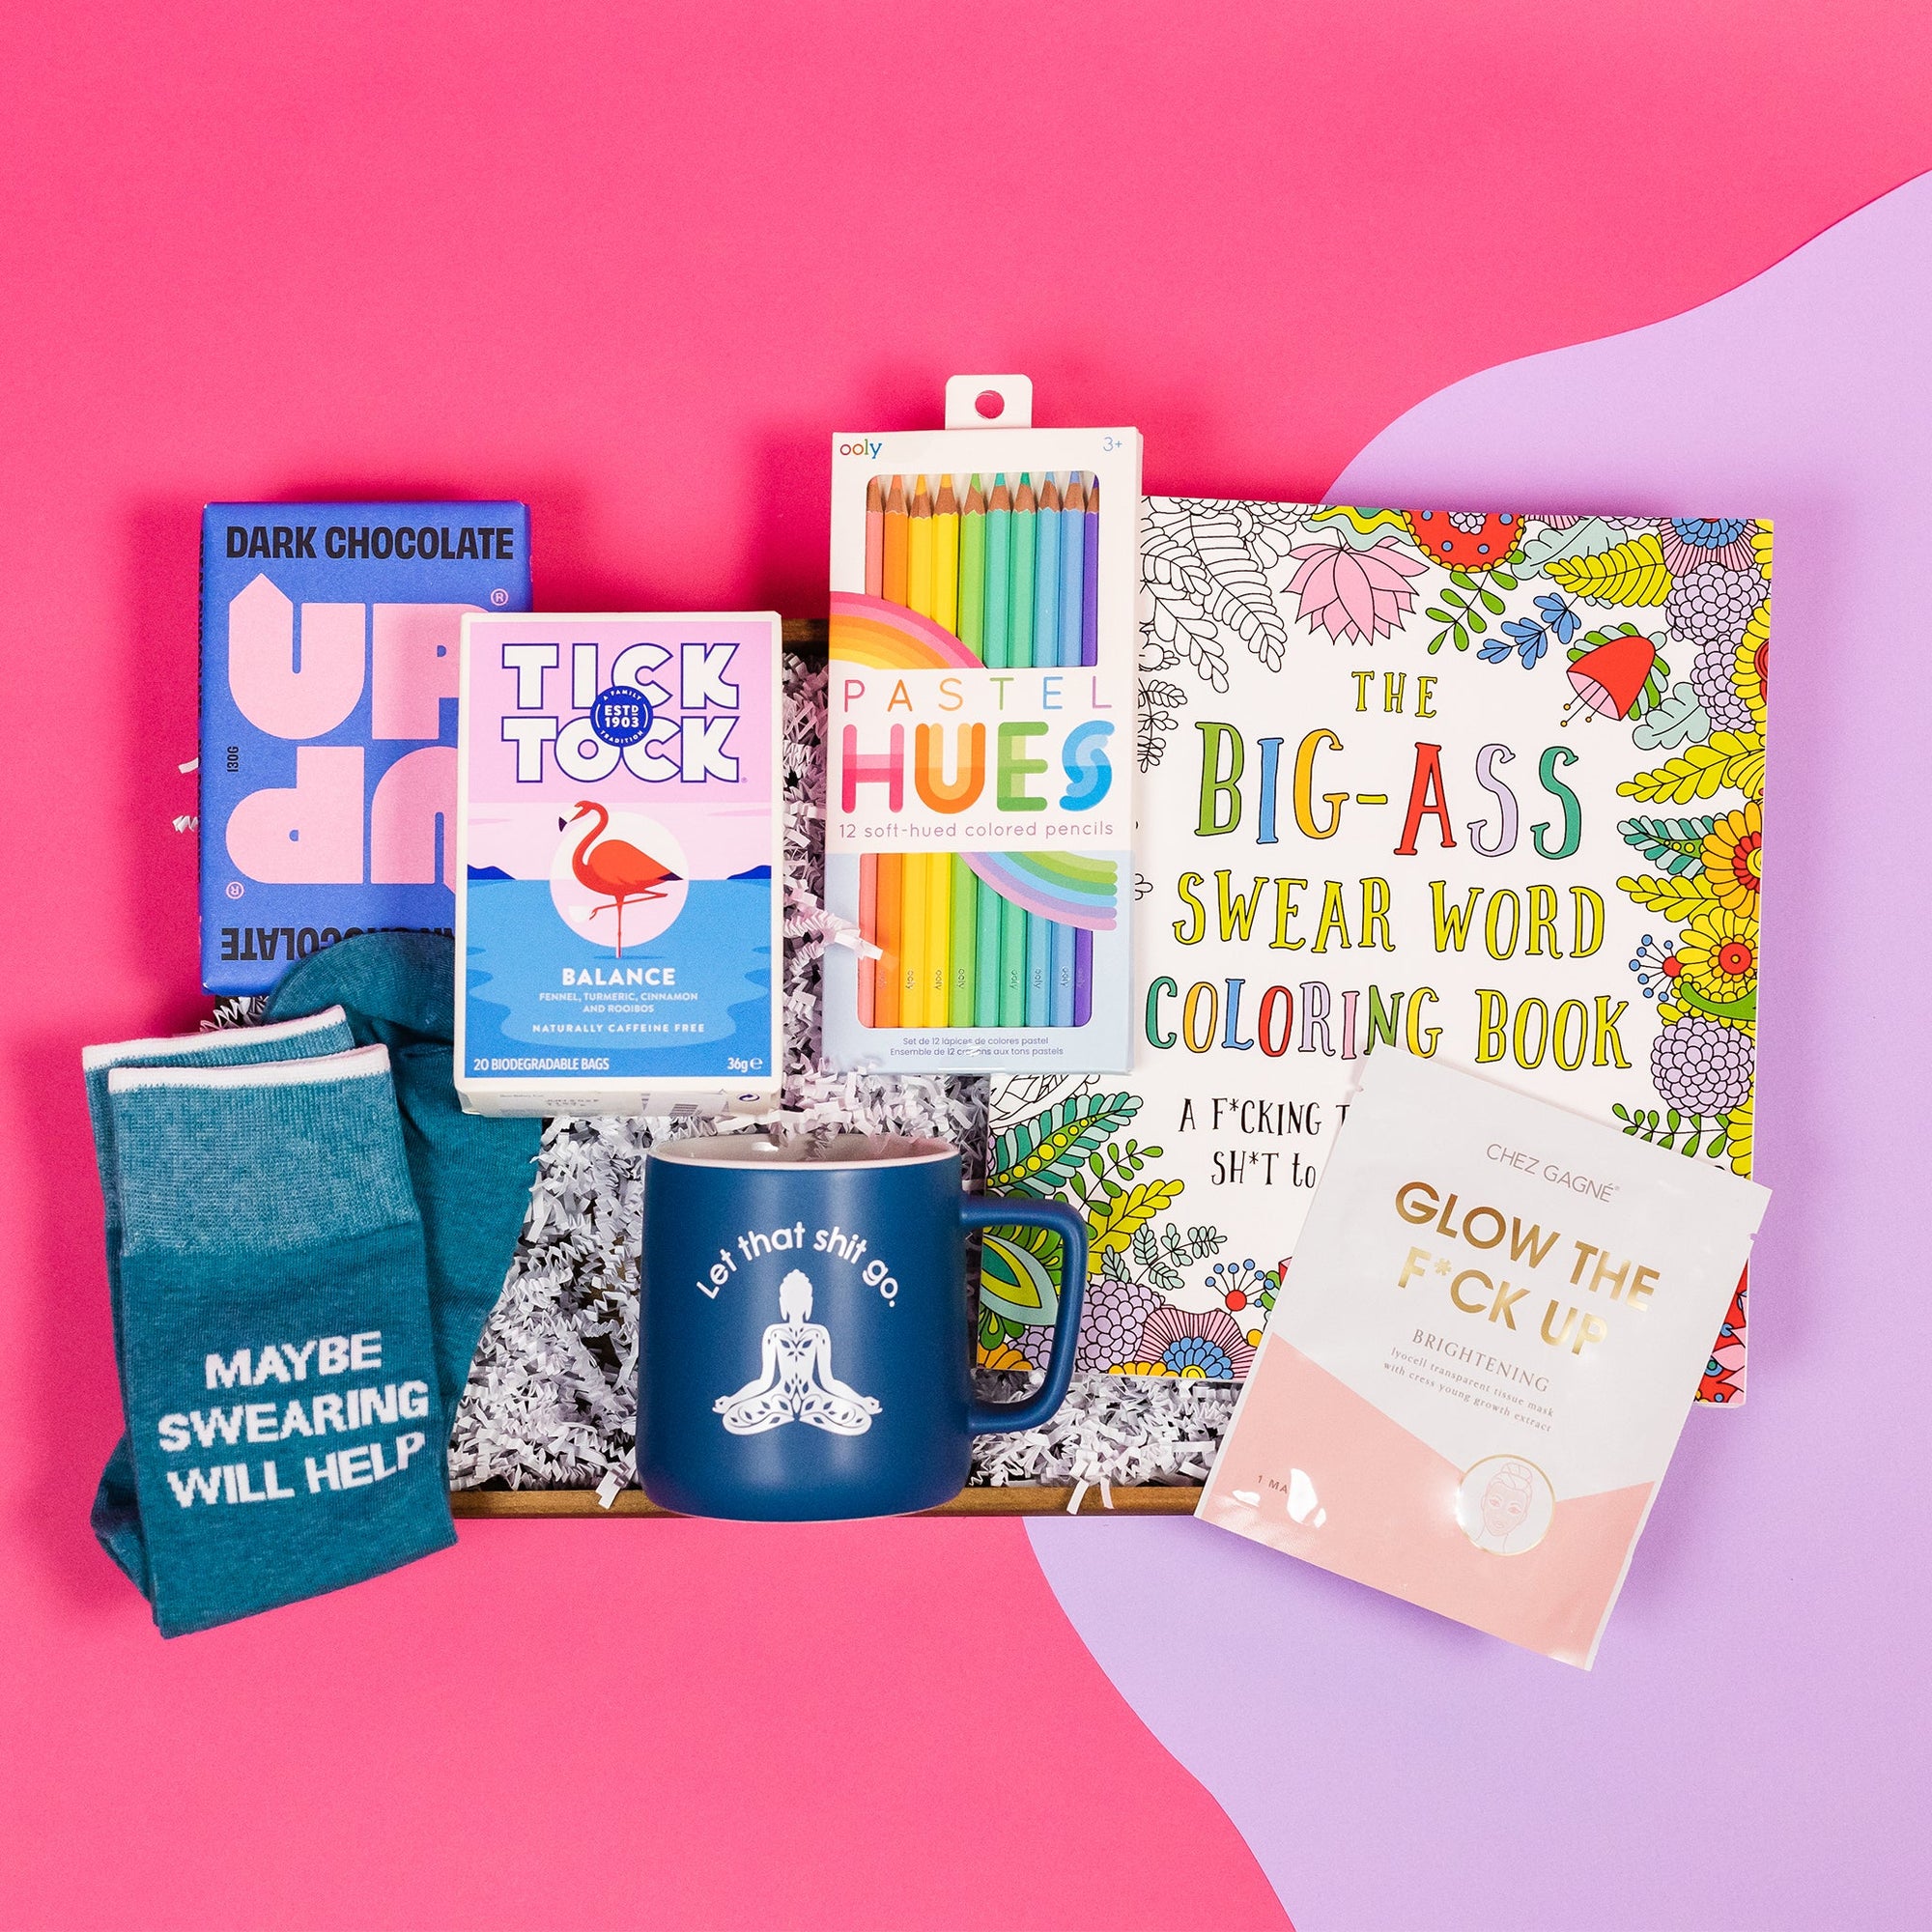 On a bright pink and purple background, a handful of optimistic, swear-themed gifts are arranged on a tray among white crinkle. The gifts includes a navy mug with a buddha sillhouette that says "Let that shit go," Tick Tock Tea 'Balance' blend, Up and Up Dark chocolate bar, a pair of blue novelty socks that says "MAYBE SWEARING WILL HELP" in white, a Chez Gagne 'Glow the Fuck Up' sheet mask, a 'Big-Ass Swear Word Coloring Book' with flowers and Ooly Pastel hues colored pencils.